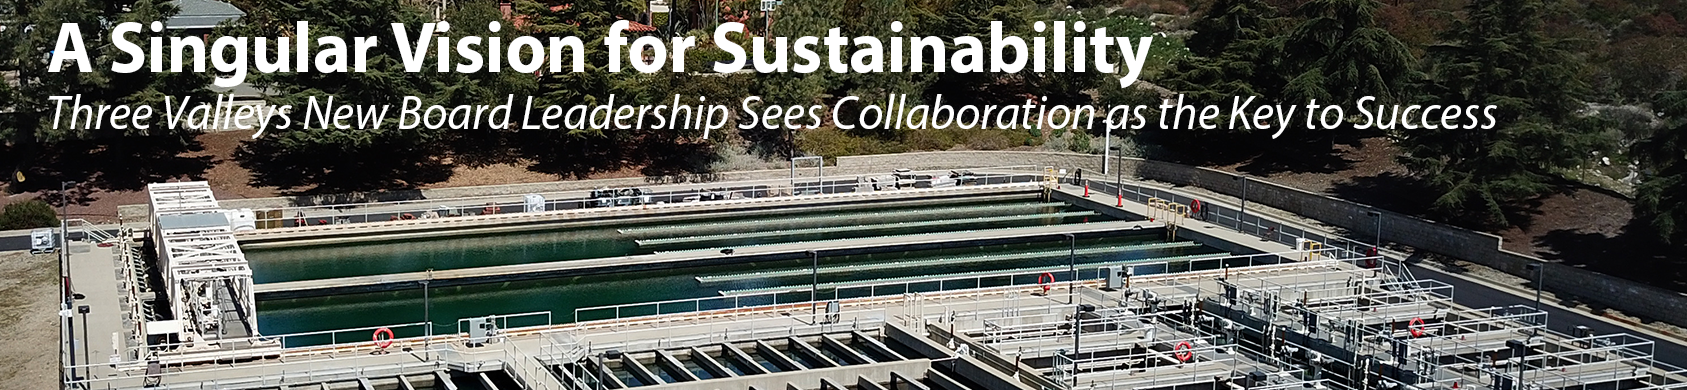 A Singular Vision for Sustainability